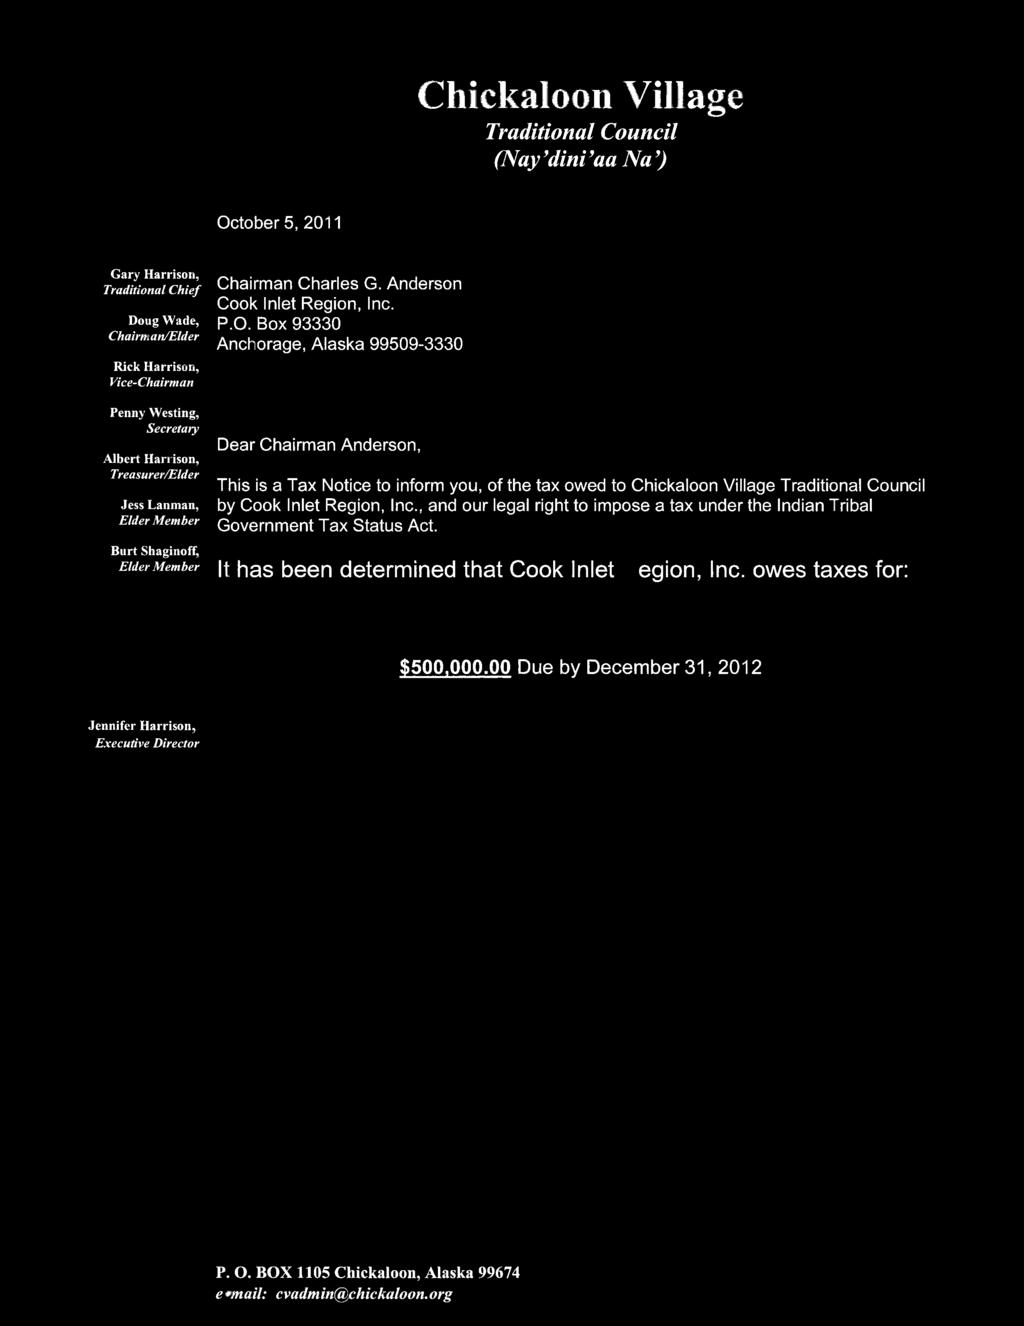 Case 3:11-cv-00228-JWS Document 1-1 Filed 11/23/11 Page 1 of 4 Chickaloon Village Traditional Council (Nay'dini'aa Na') October 5, 2011 Gary Harrison, Traditional Chief Doug Wade, Chairman/Elder Rick